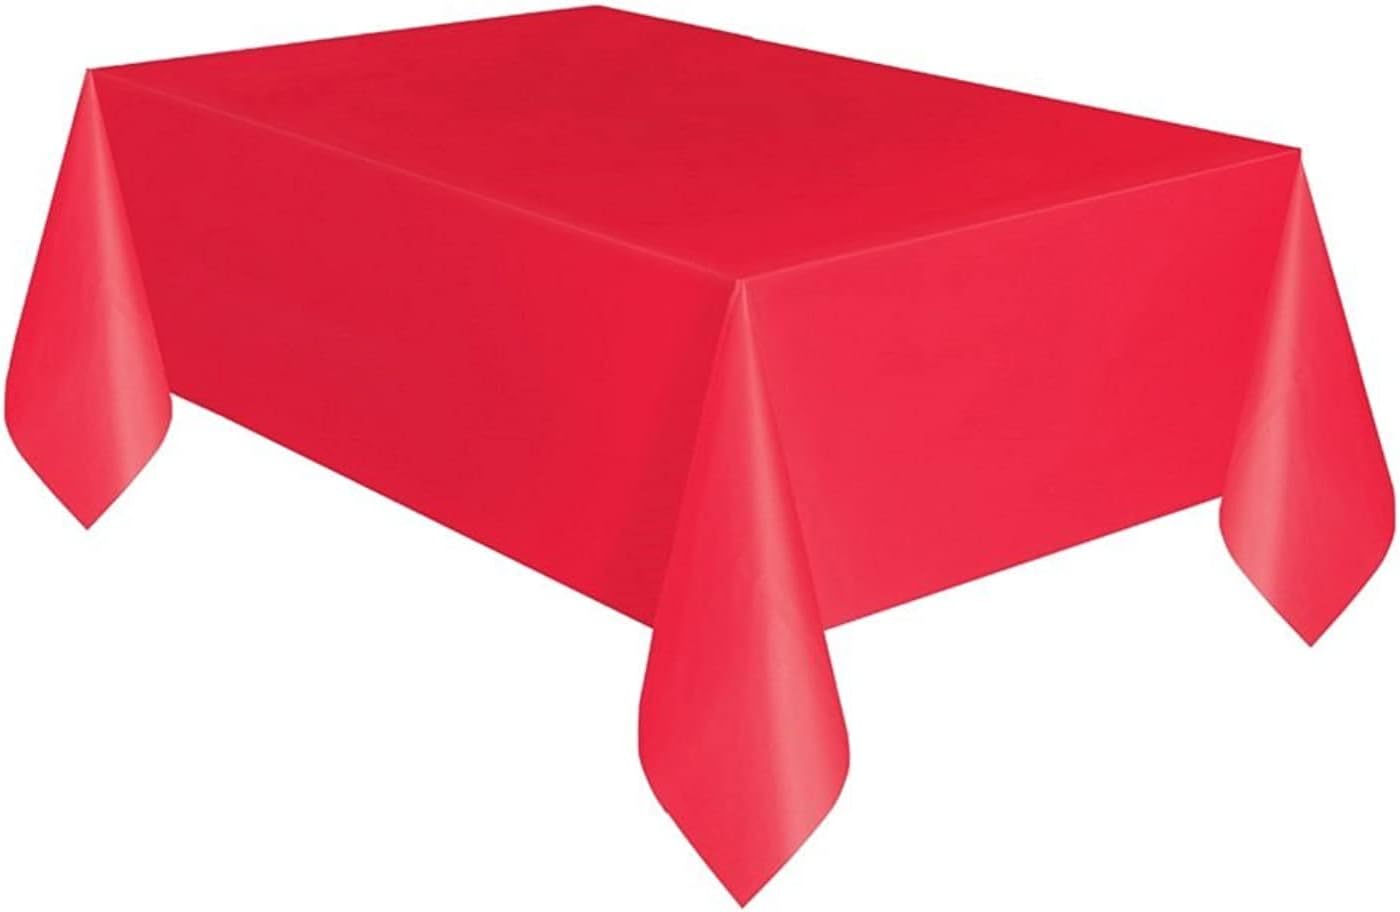 Red Solid Rectangular Plastic Table Cover  54" x 108" - Short Fold